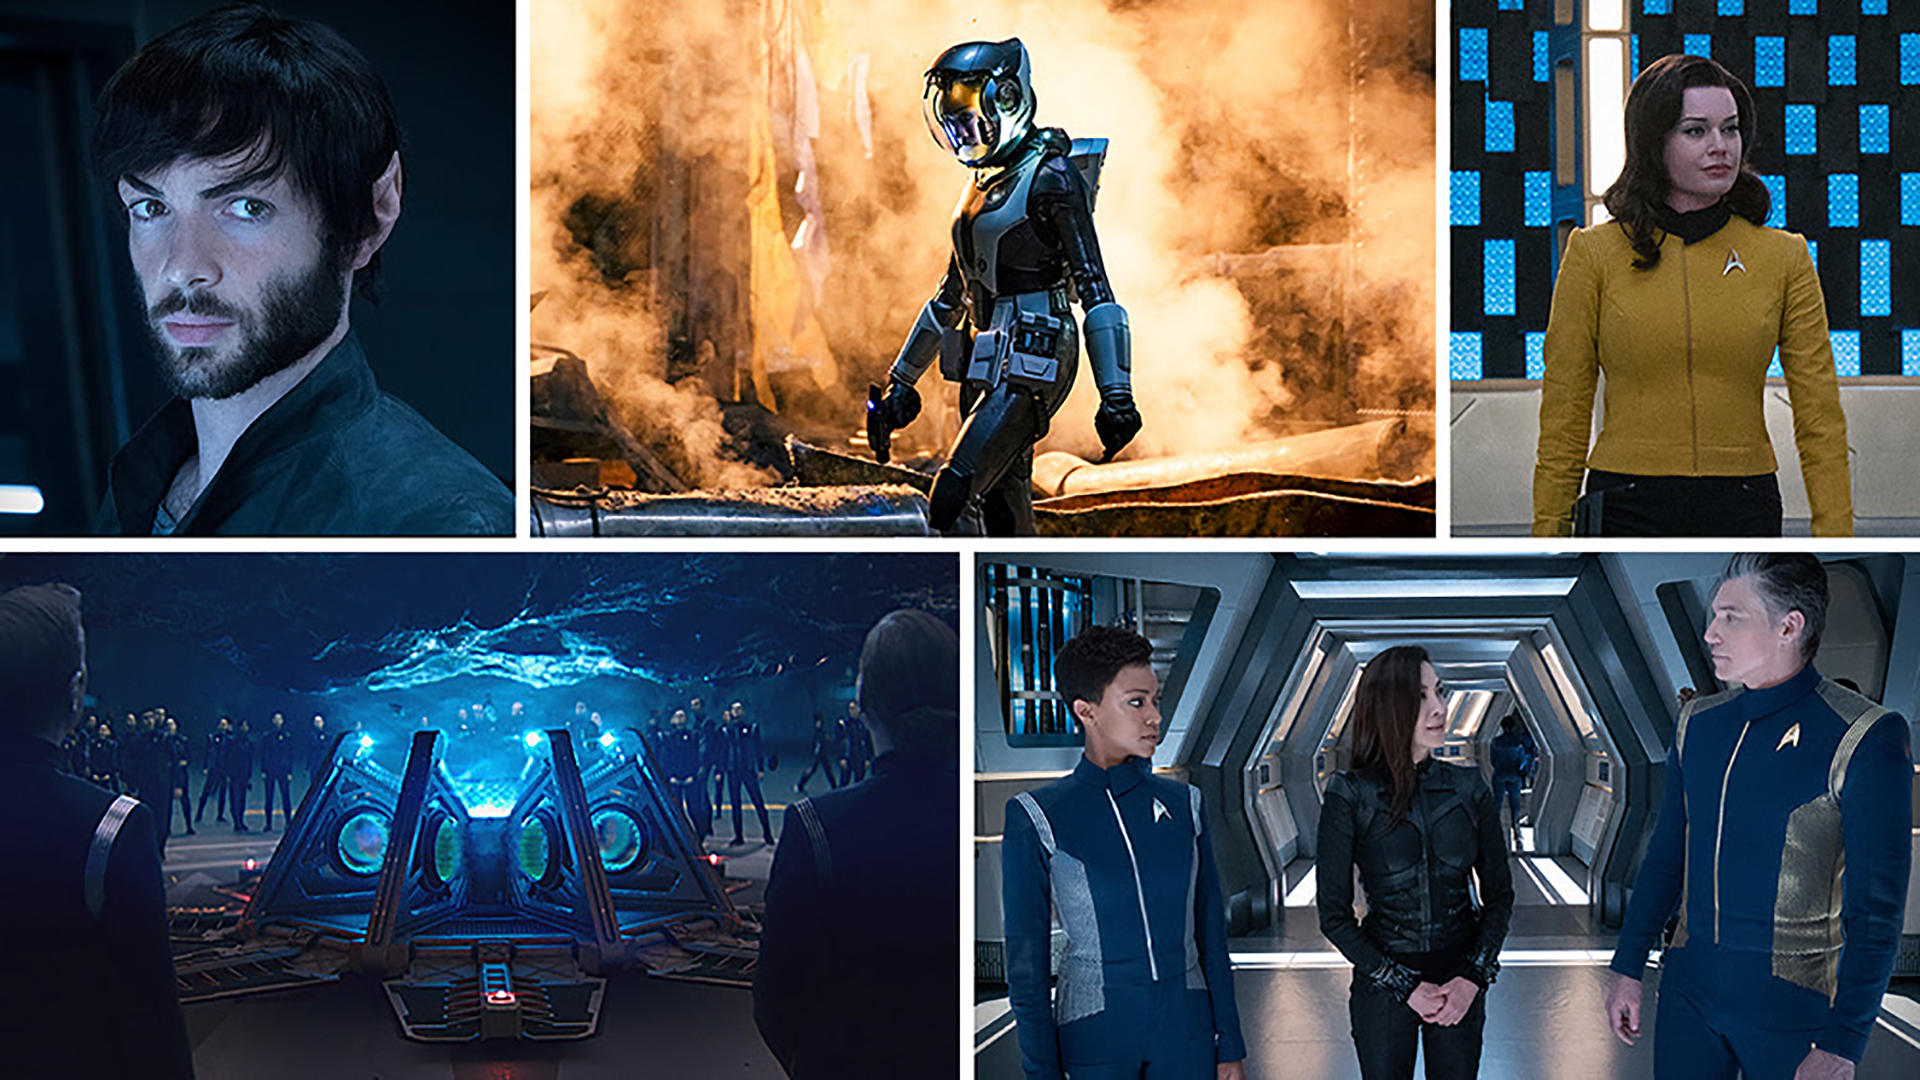 Watch The Official Season 2 Trailer Of Star Trek: Discovery1920 x 1080